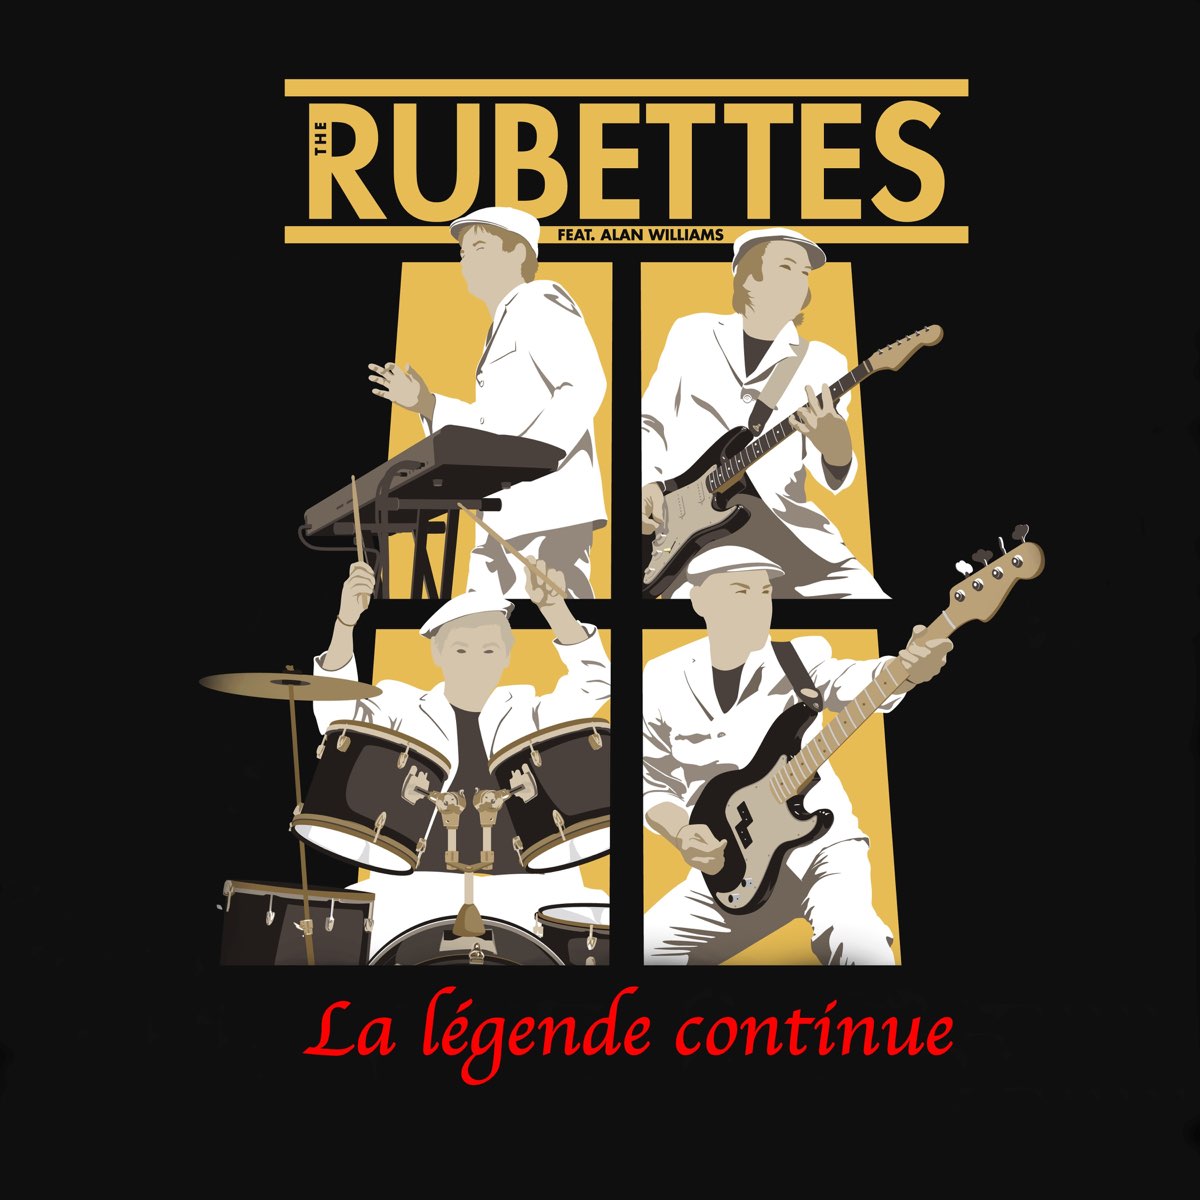 La Legende Continue By Rubettes Featuring Alan Williams On Apple Music